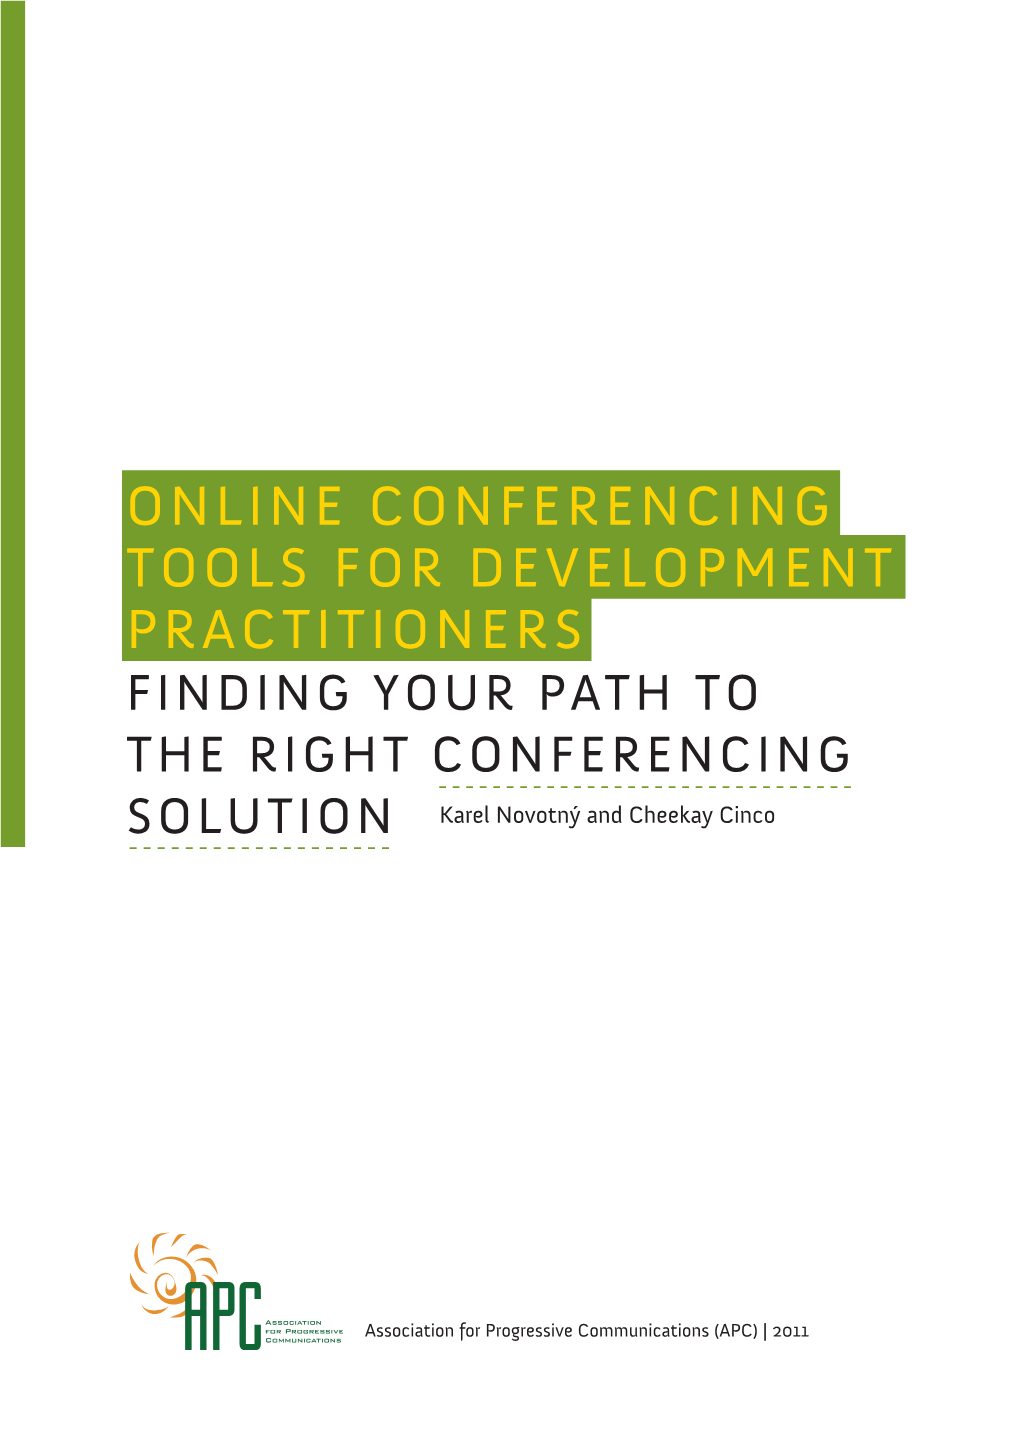 ONLINE CONFERENCING TOOLS for DEVELOPMENT PRACTITIONERS FINDING YOUR PATH to the RIGHT CONFERENCING SOLUTION Karel Novotný and Cheekay Cinco